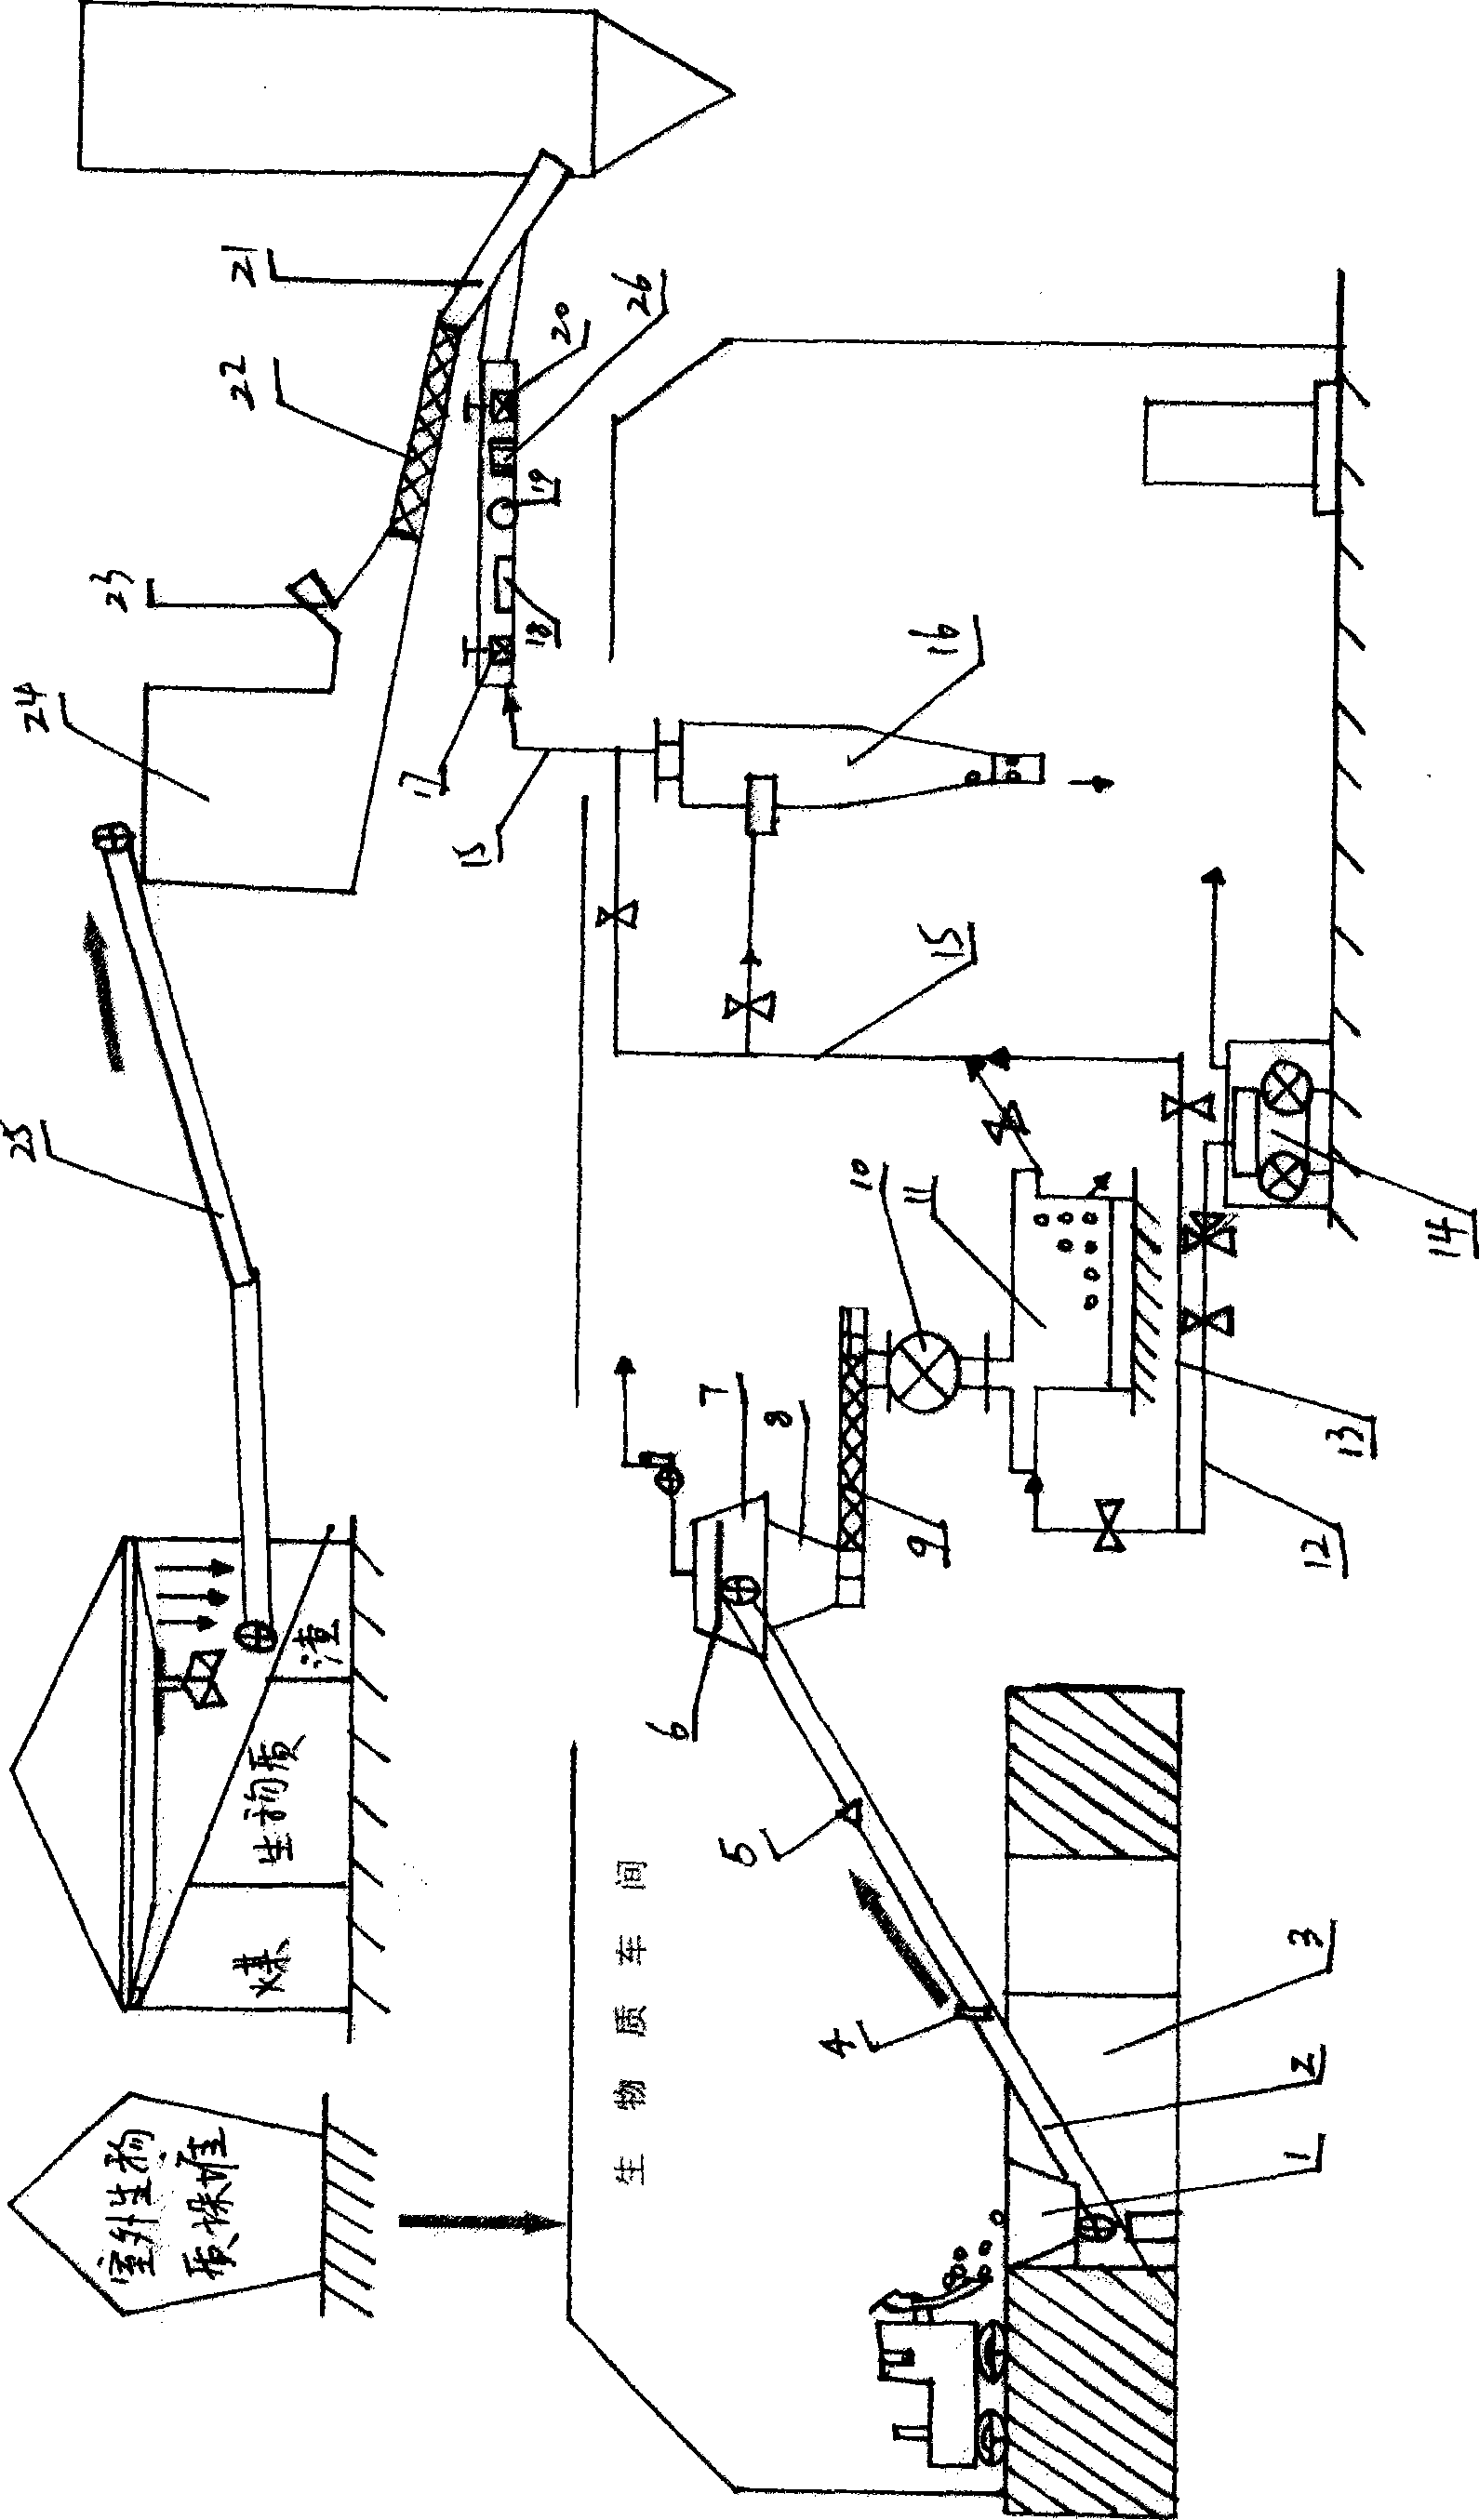 Device and system for feeding large bio-material to furnace for directly burning generating